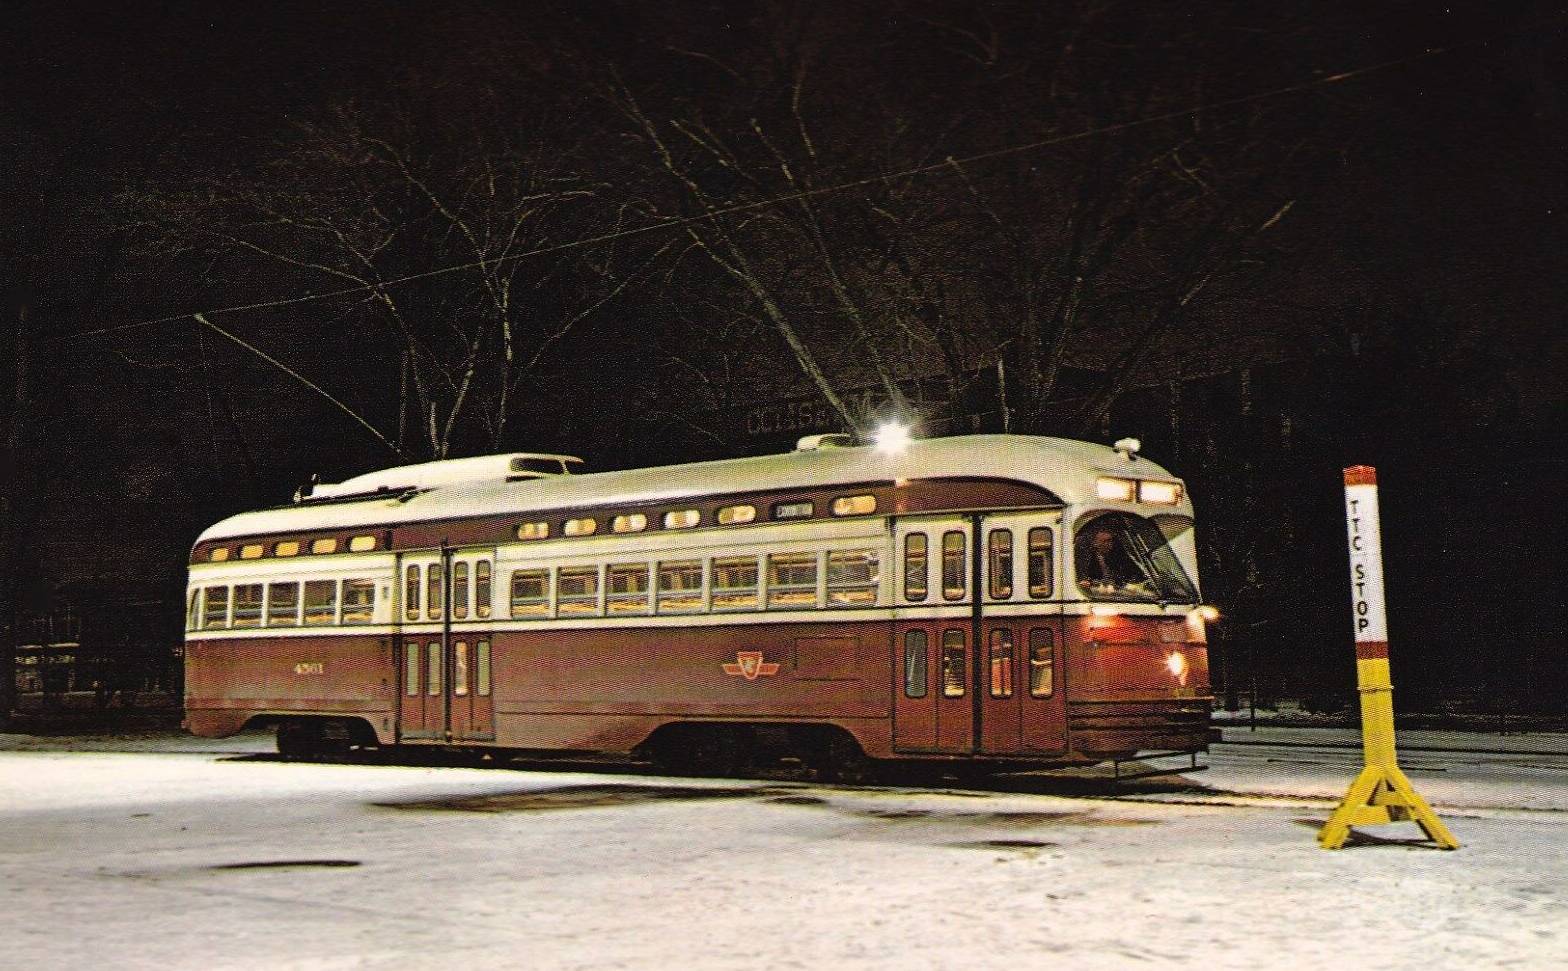 POSTCARD - TORONTO - EXHIBITION LOOP - TTC PCC STREETCAR - NIGHT - NOTE TEMPOARY STOP SIGN USED GENERALLY -AN IMAGE WITH A REAL FEEL OF ITS TIME - NICE VERSION - 1966